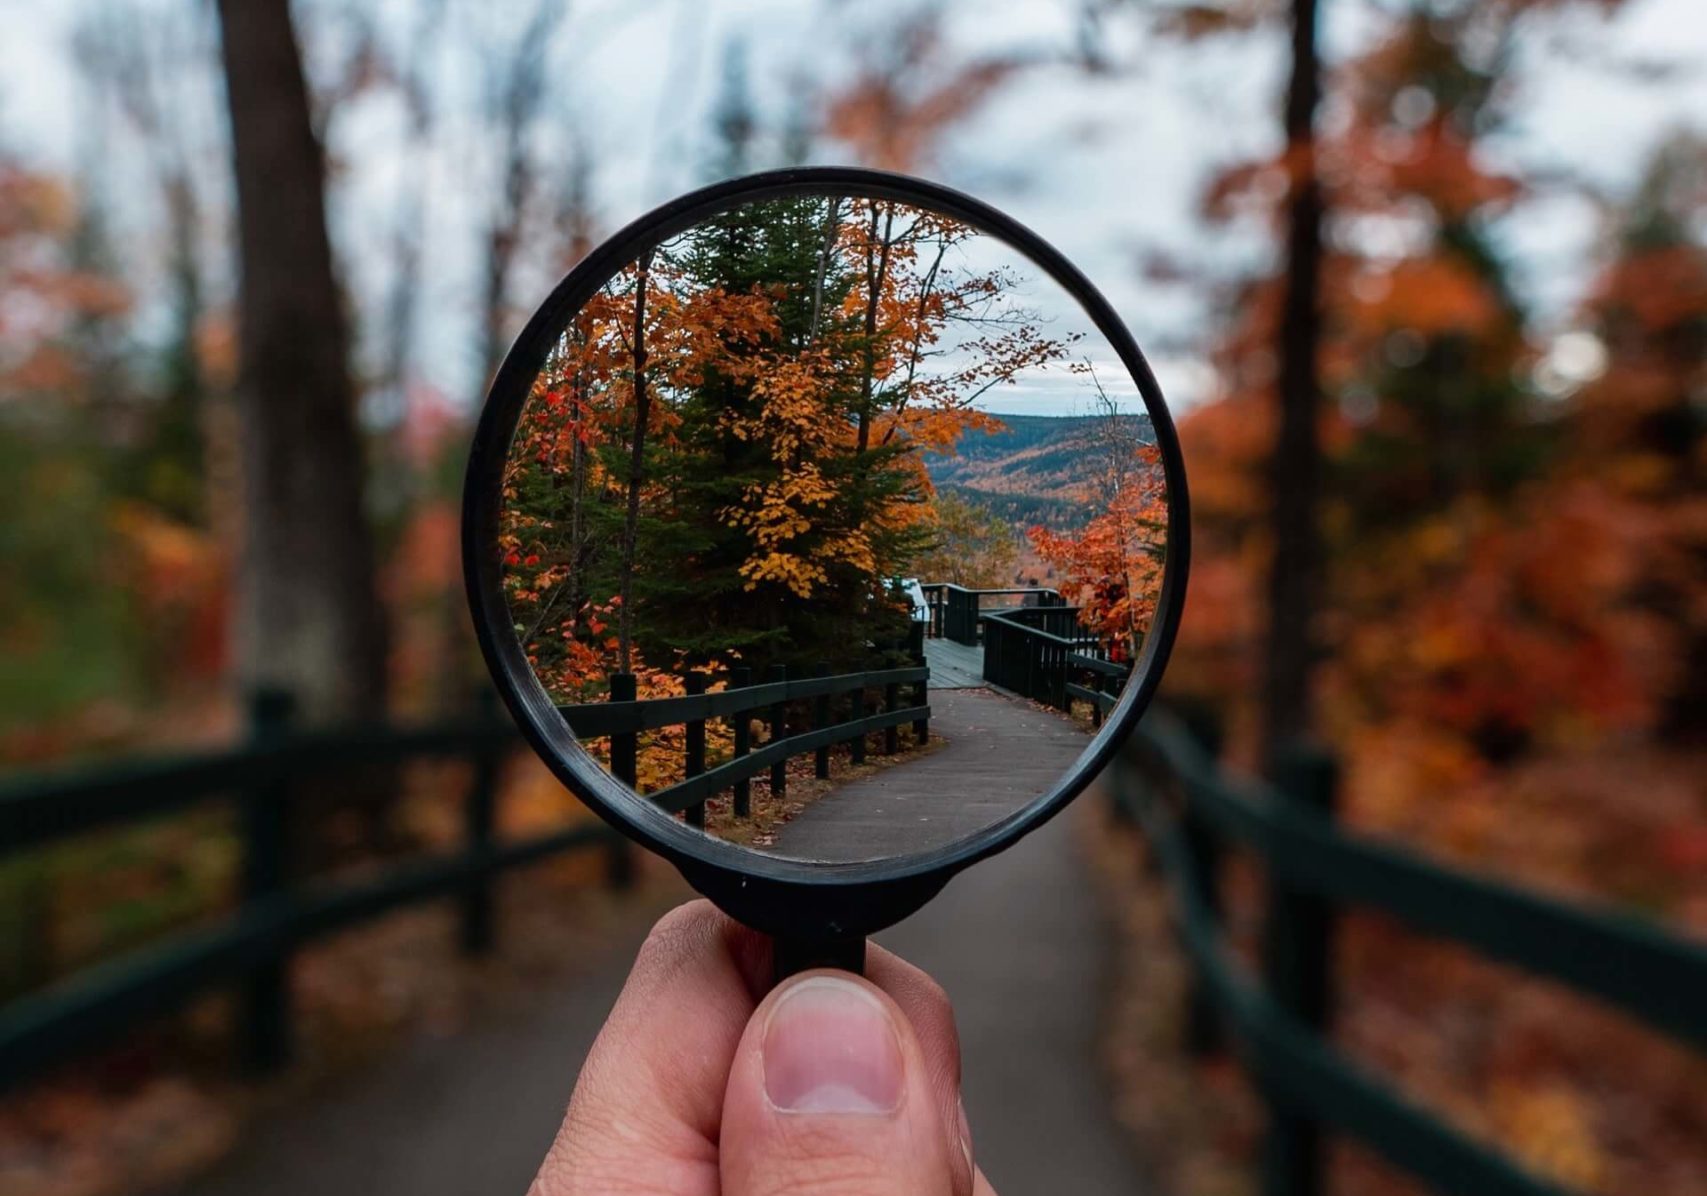 A magnifying glass is held in front of a paved trail with bright orange fall foliage on all sides of the trail